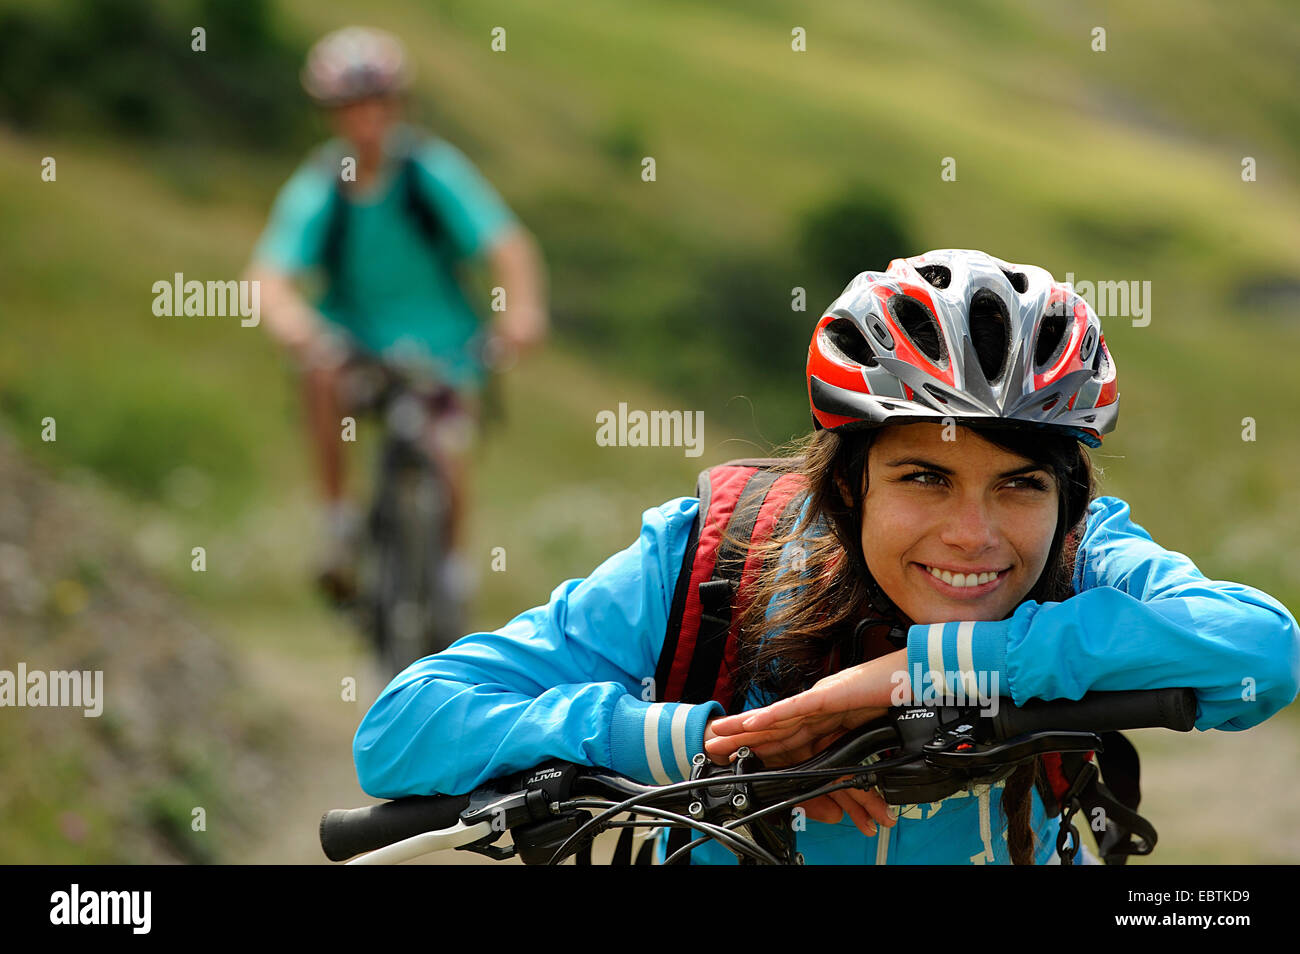 Teenage girl with vtt ayant une pause, France, Savoie Banque D'Images